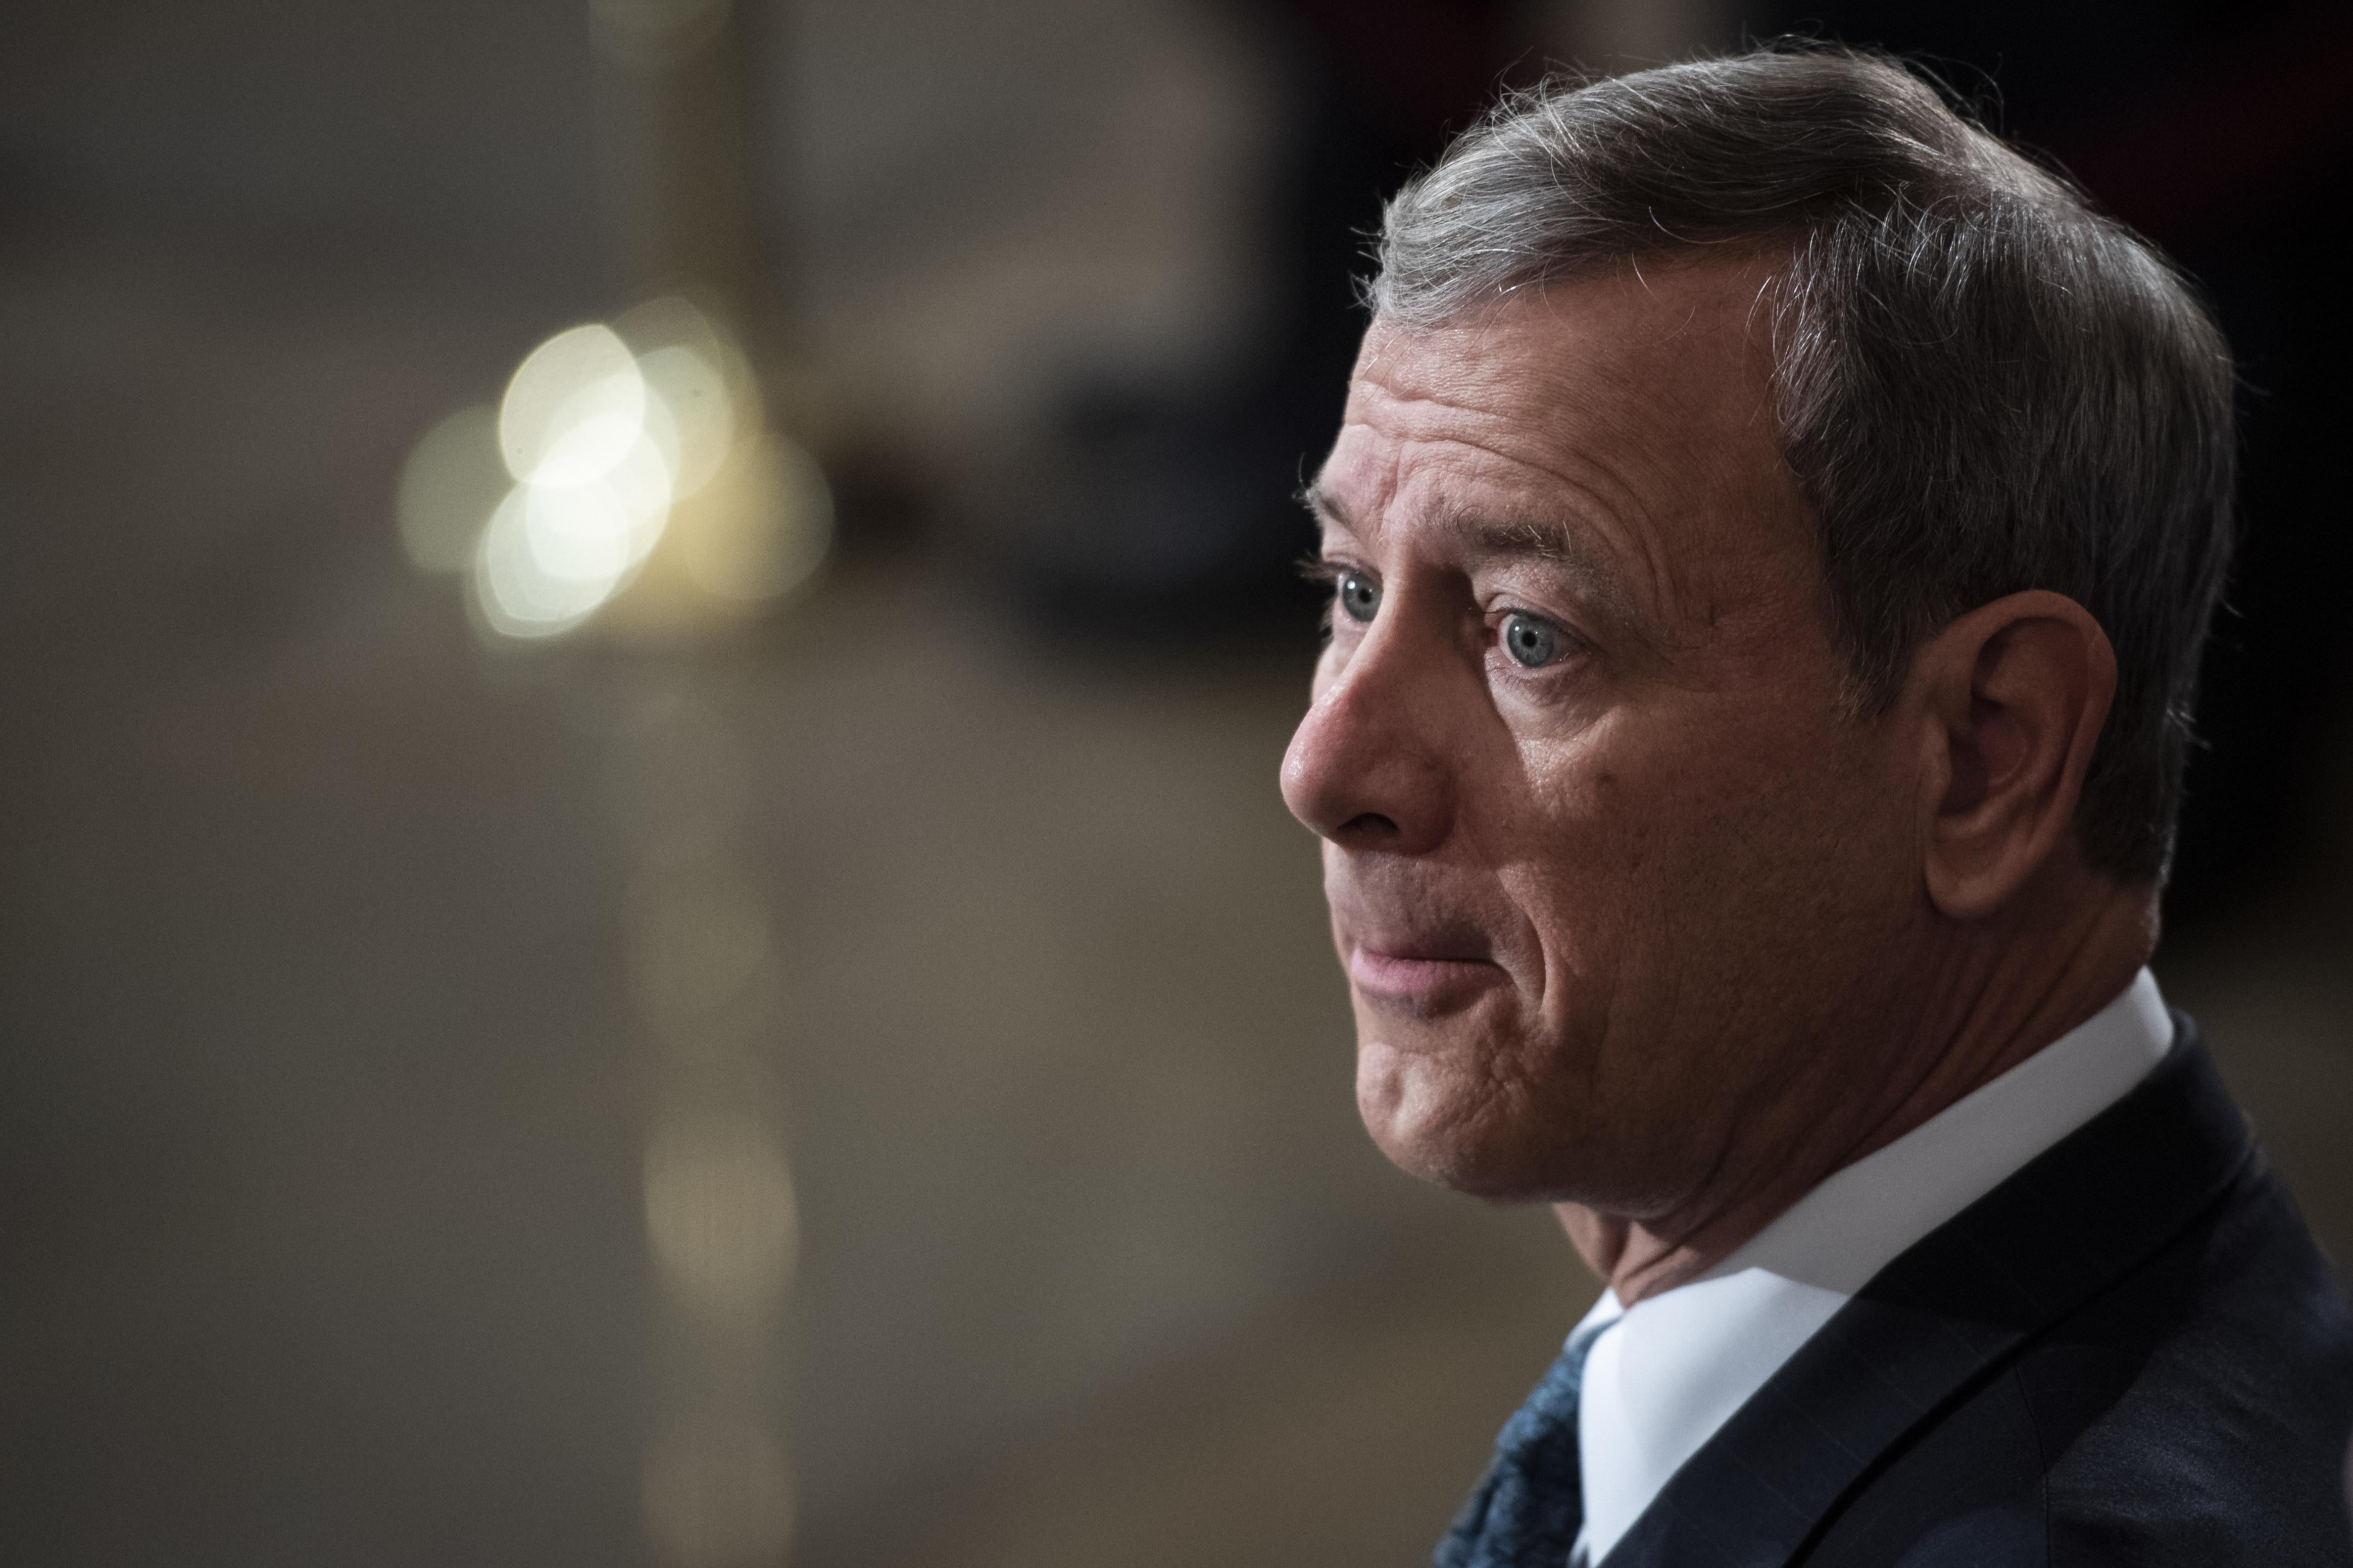 Chief Justice John Roberts waits for the arrival of former U.S. President George H.W. Bush at the U.S Capitol Rotunda on December 03, 2018 in Washington, D.C.